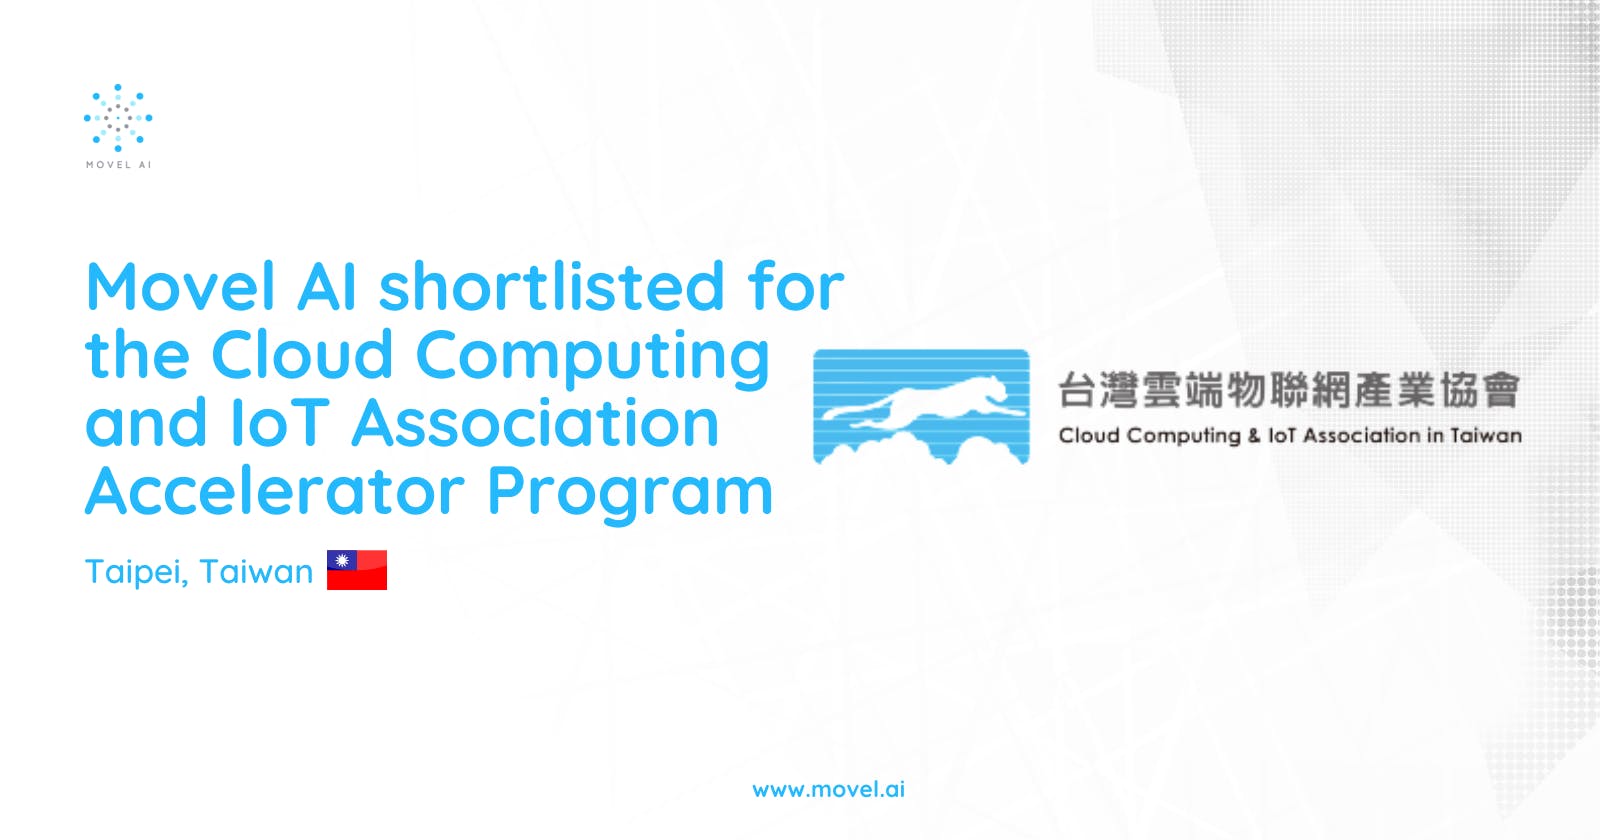 Movel AI shortlisted for the Cloud Computing & IoT Association (CIAT) Accelerator Program